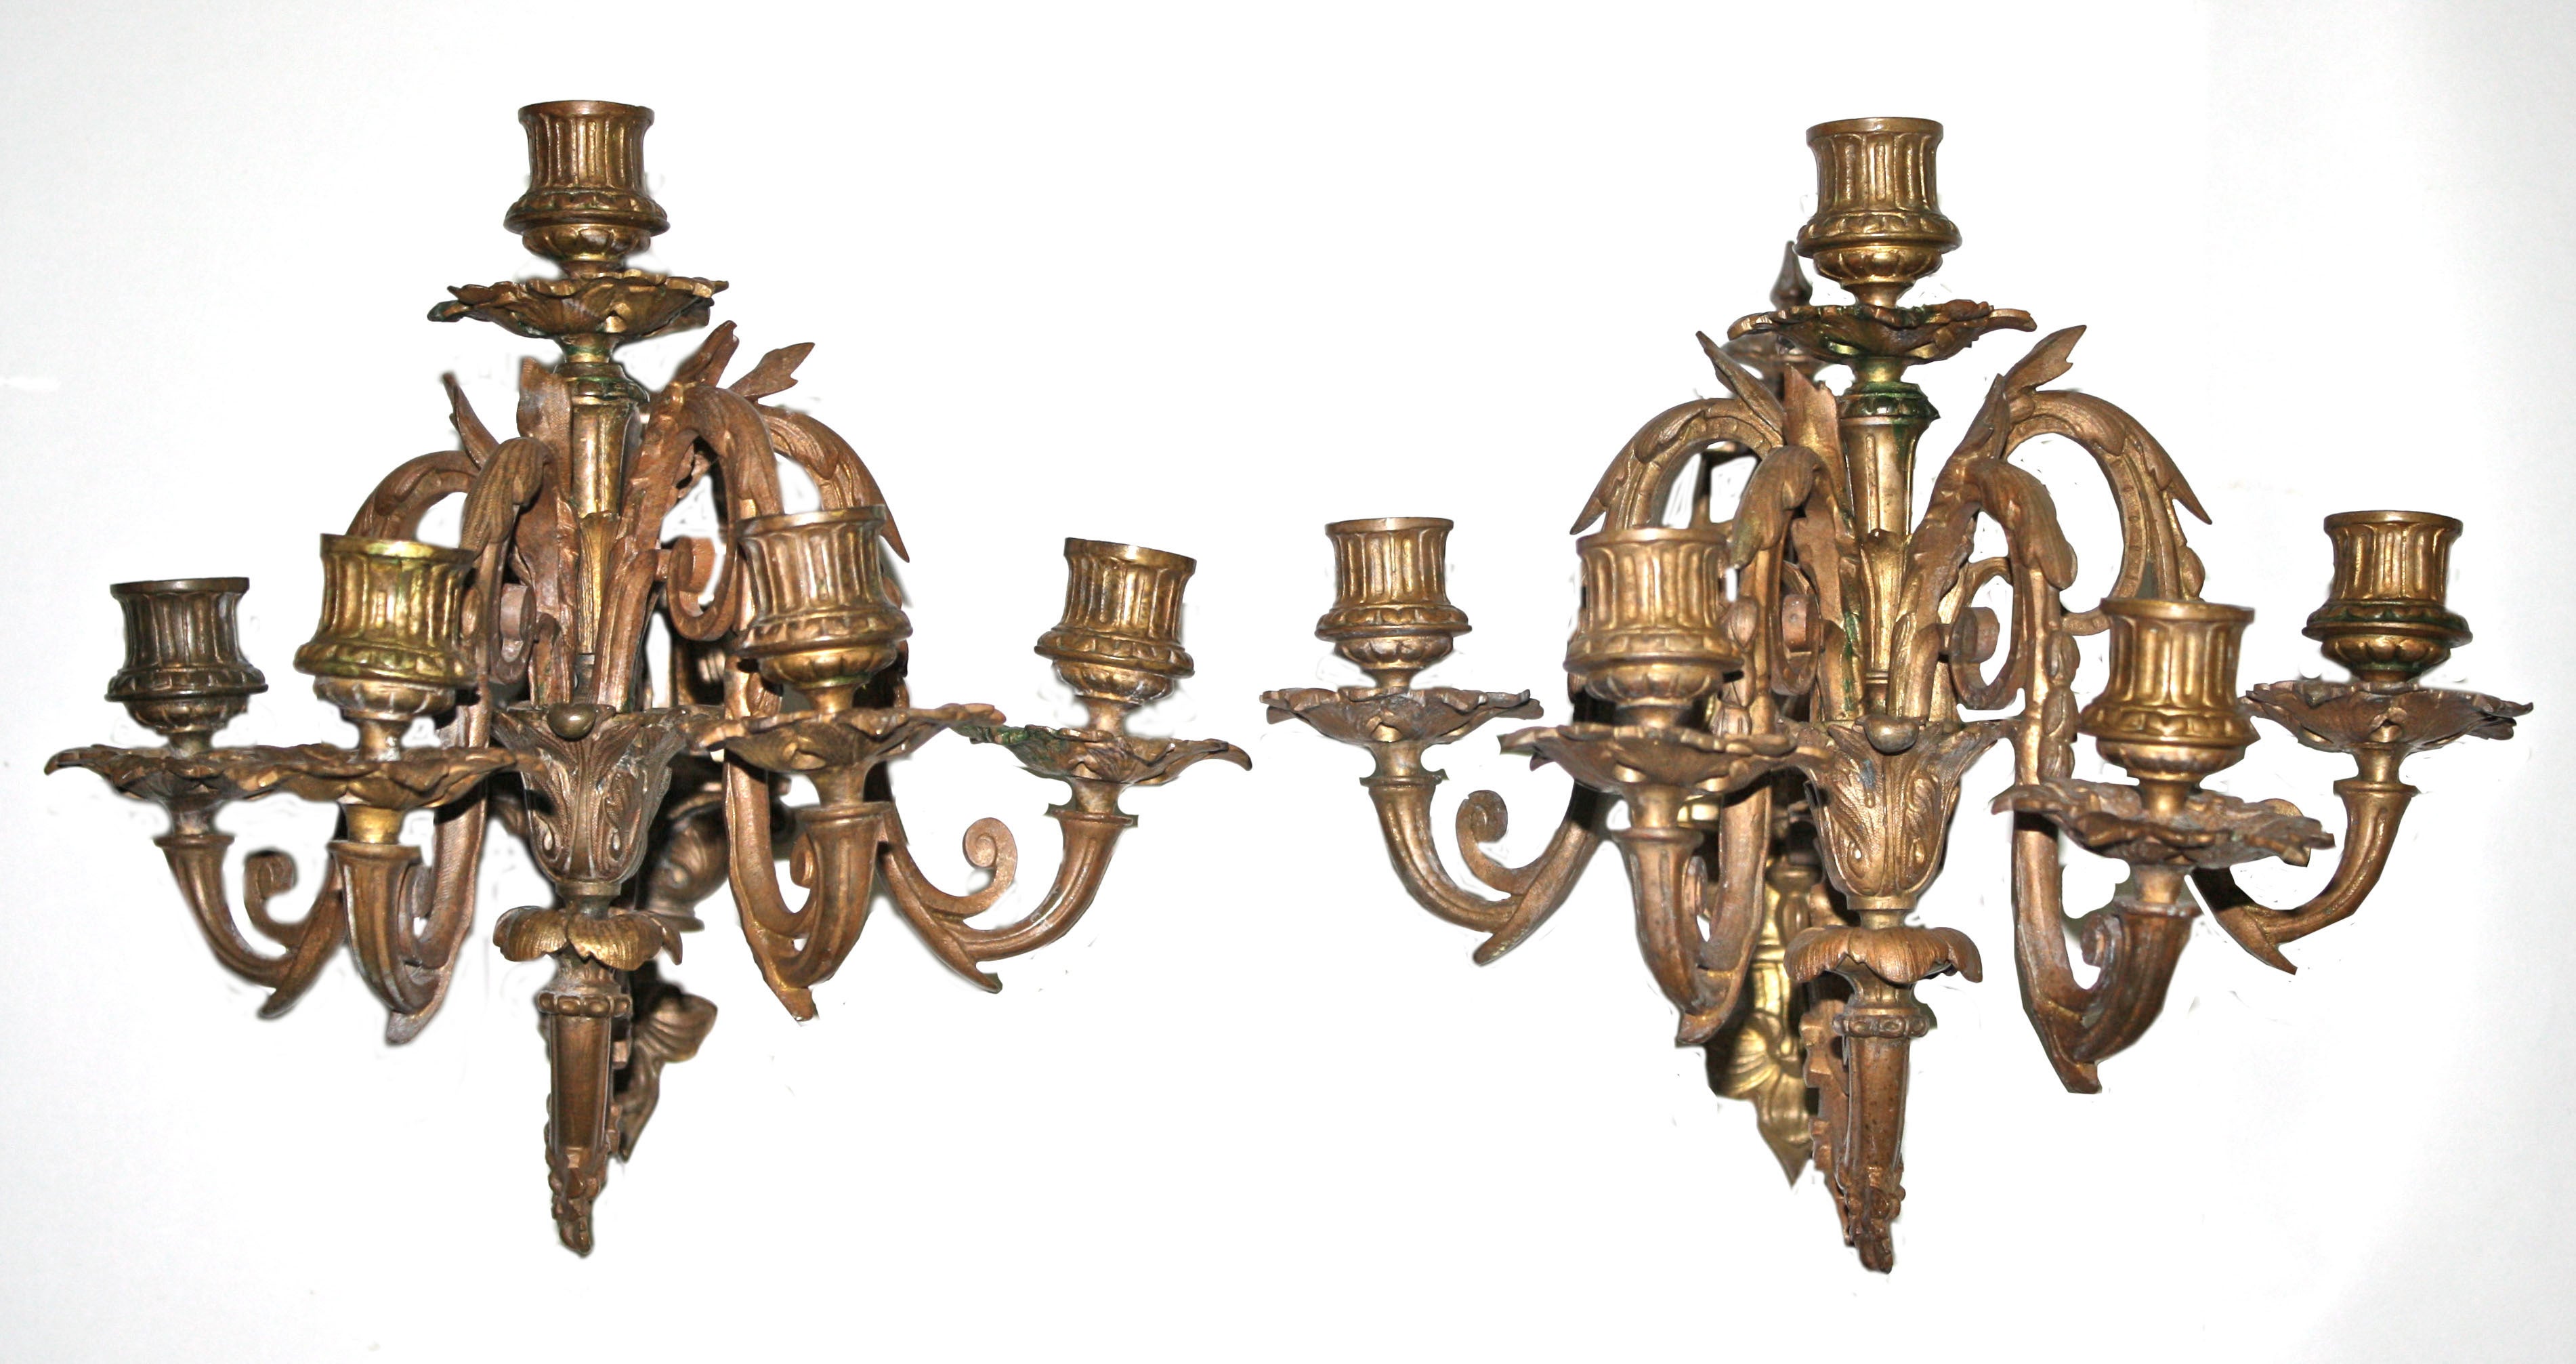 PAIR Neoclassical Revival Five-candle Girandoles - Astor Provenance For Sale